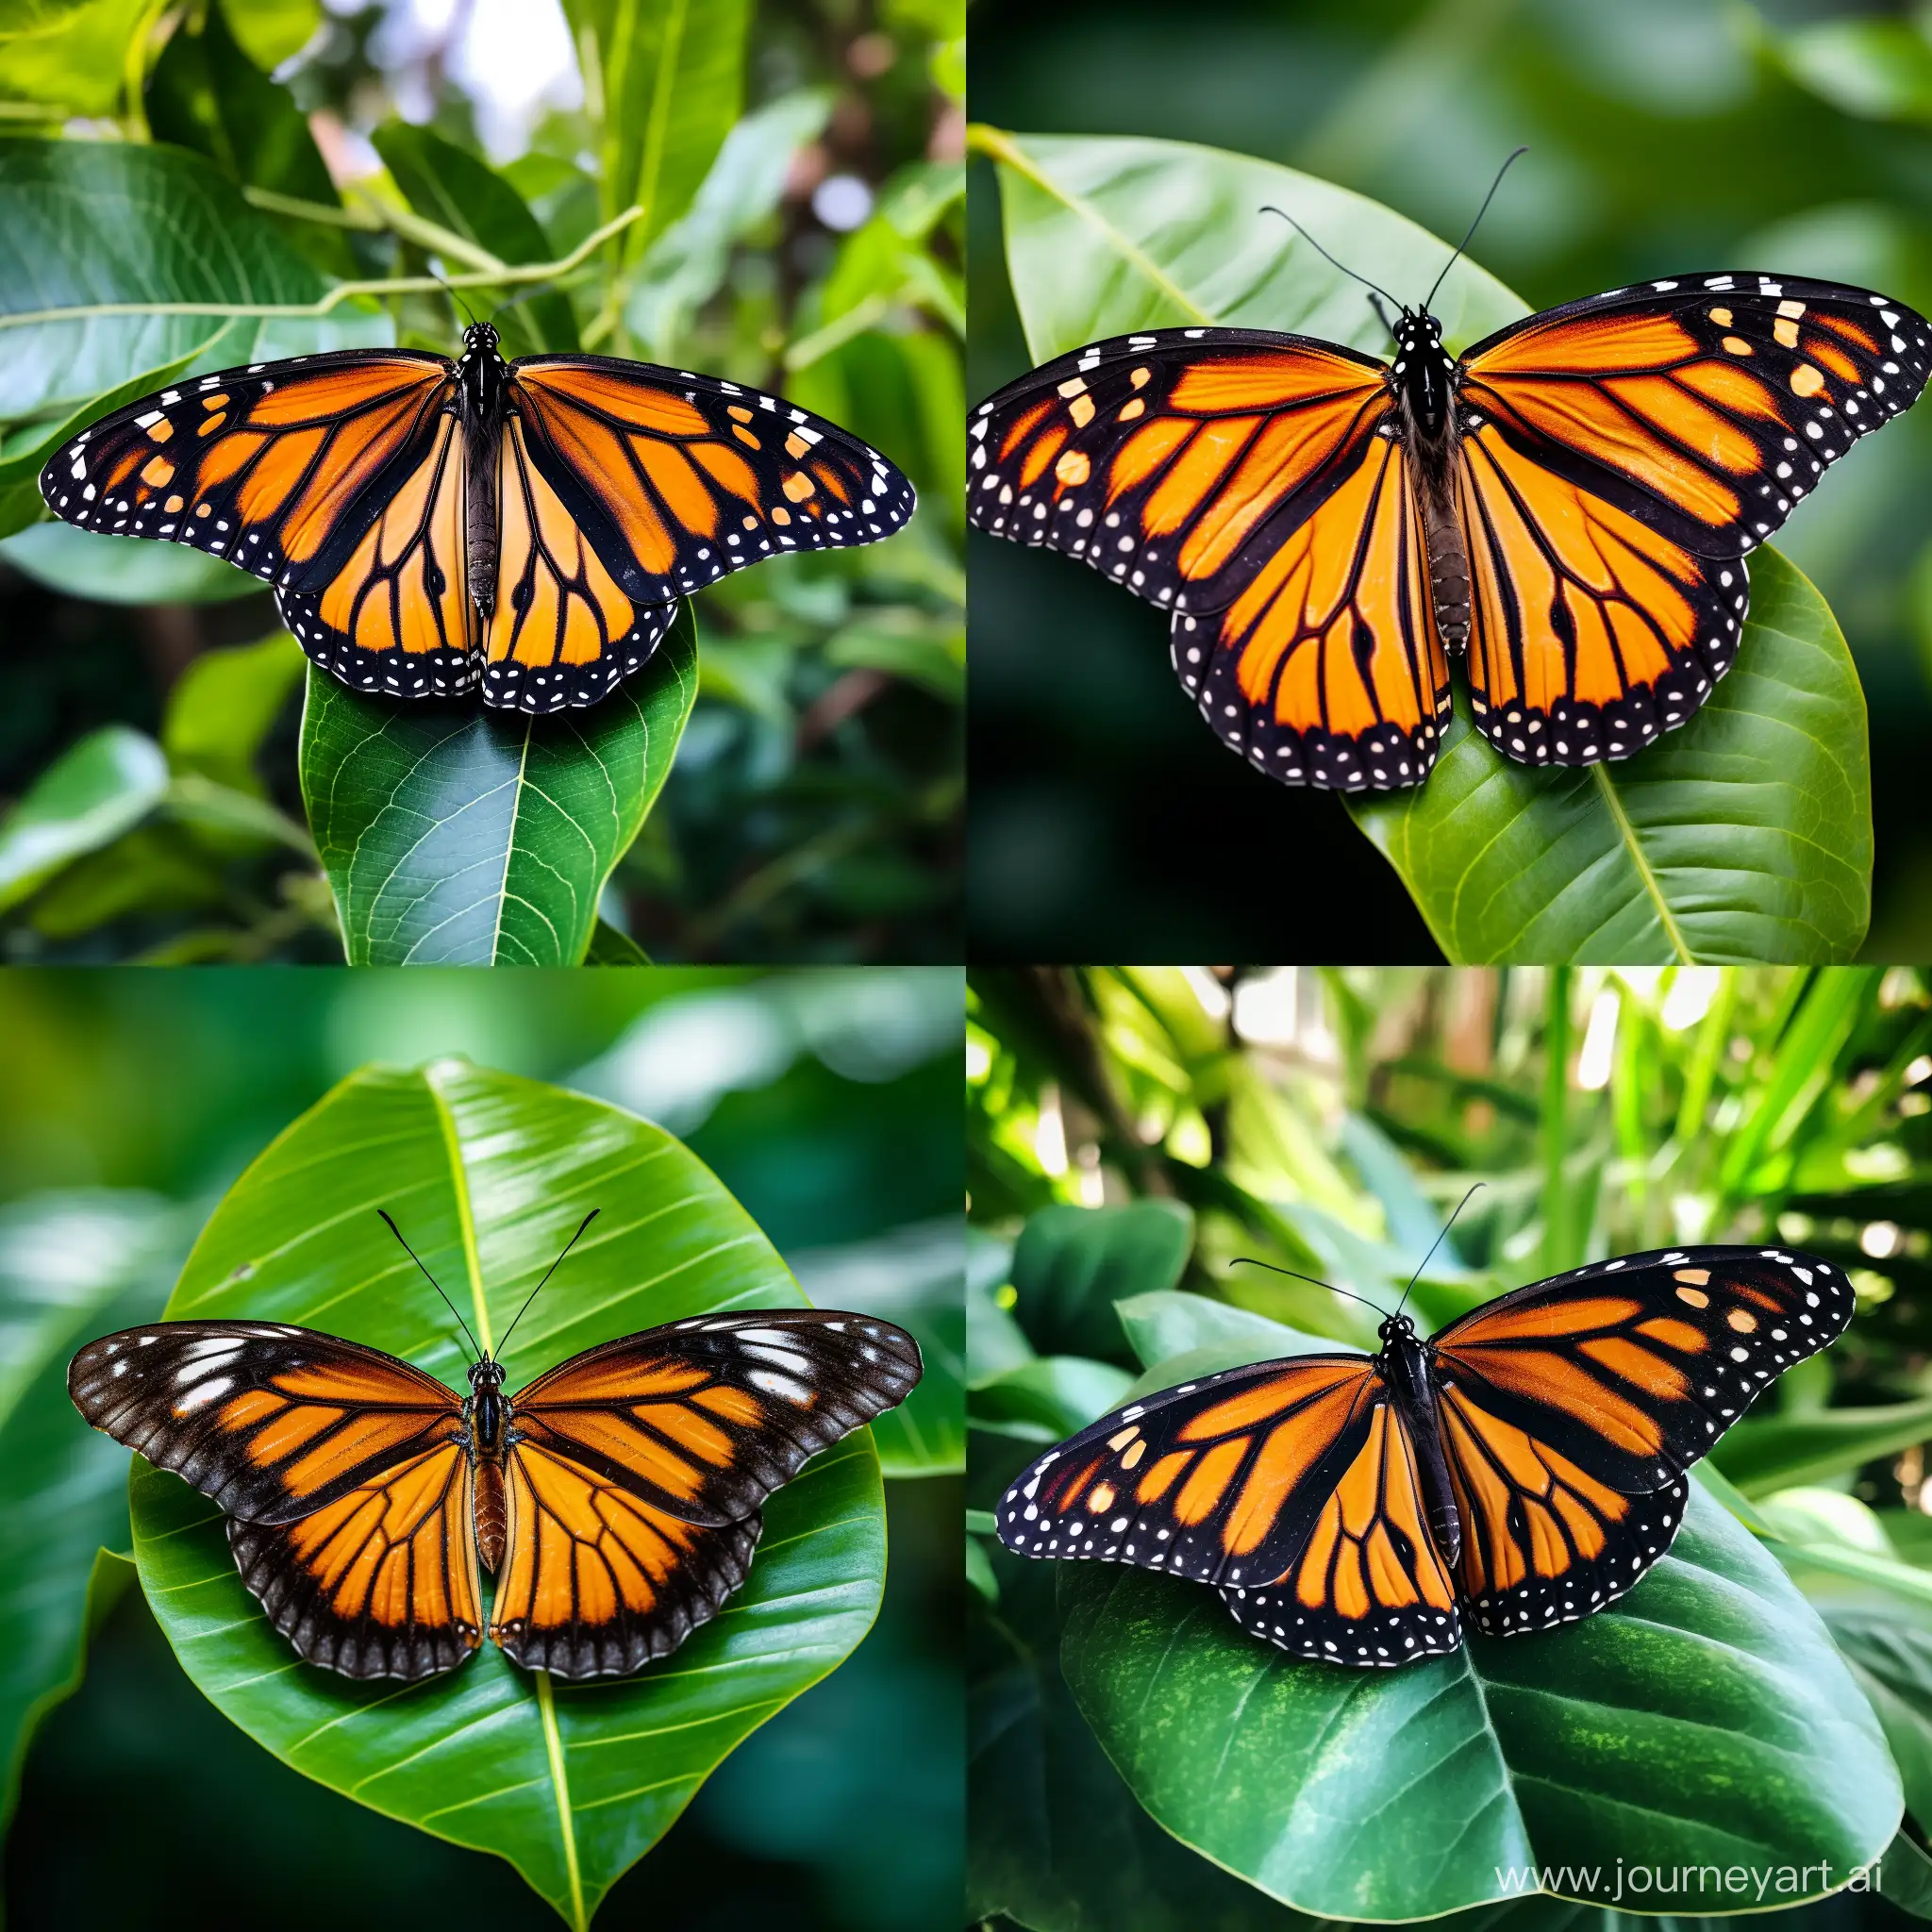 Graceful-Monarch-Butterfly-Resting-on-Vibrant-Green-Leaf